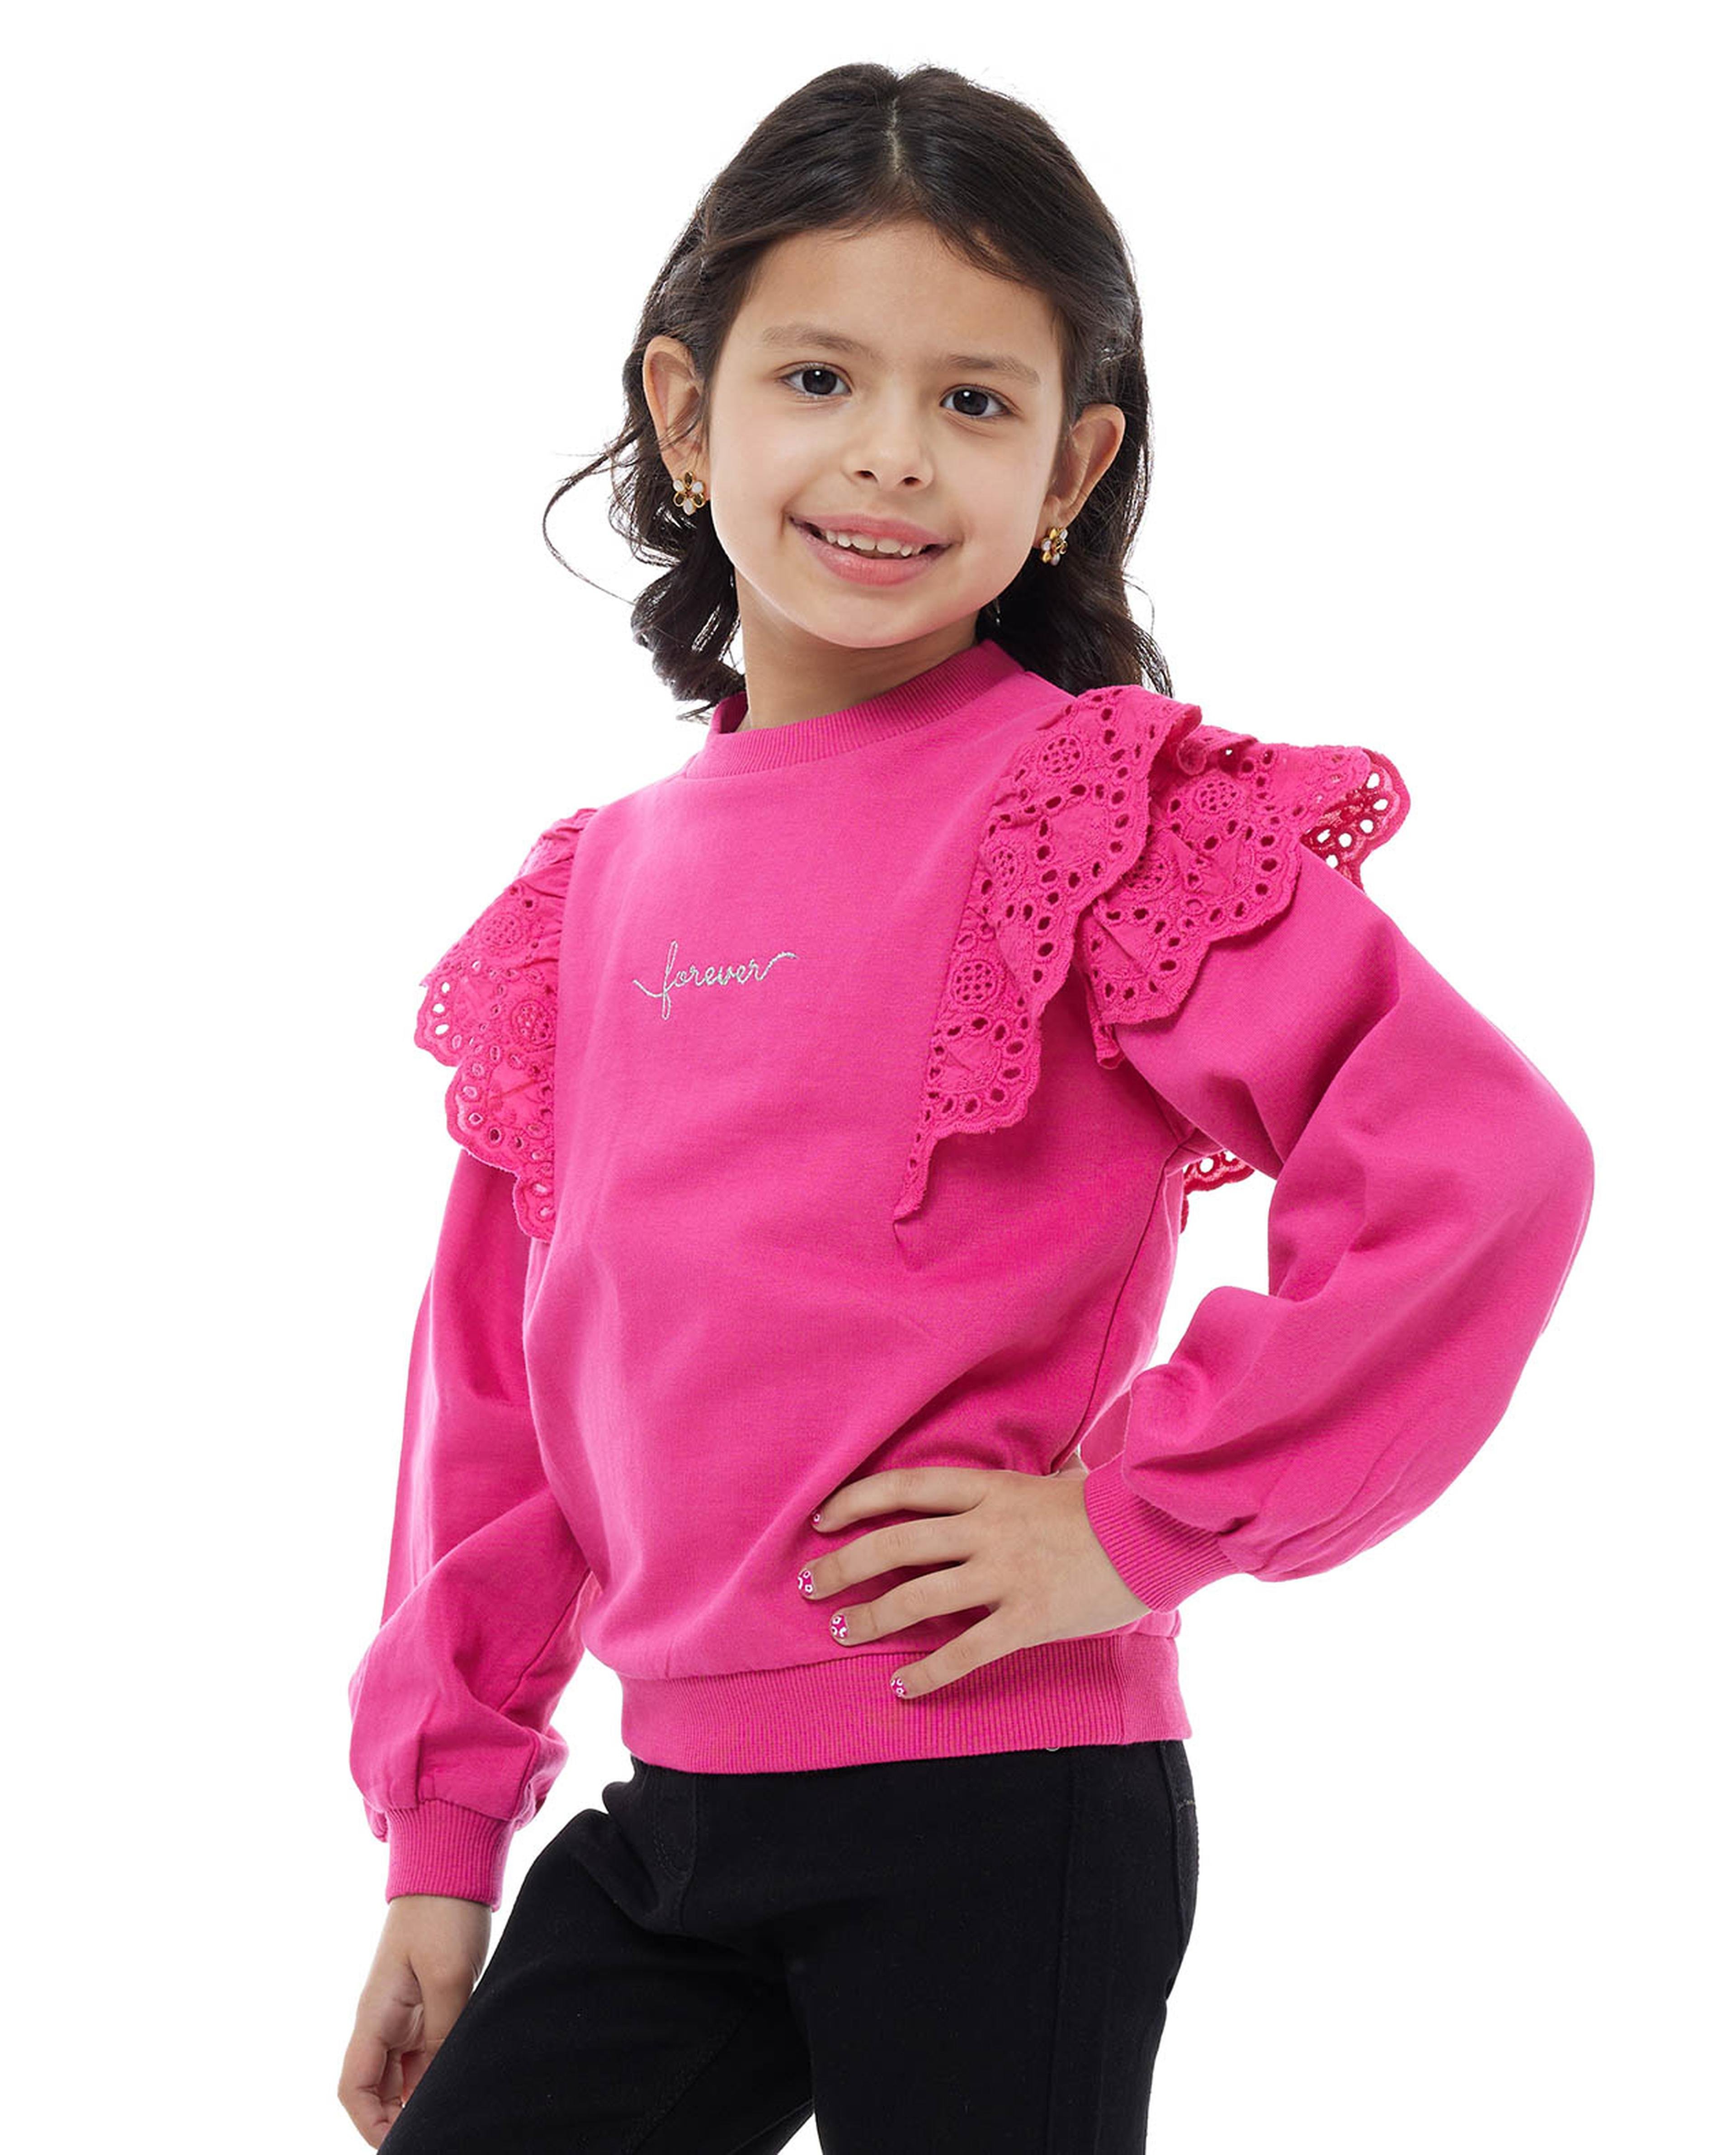 Embroidery Detail Sweatshirt with Long Sleeves